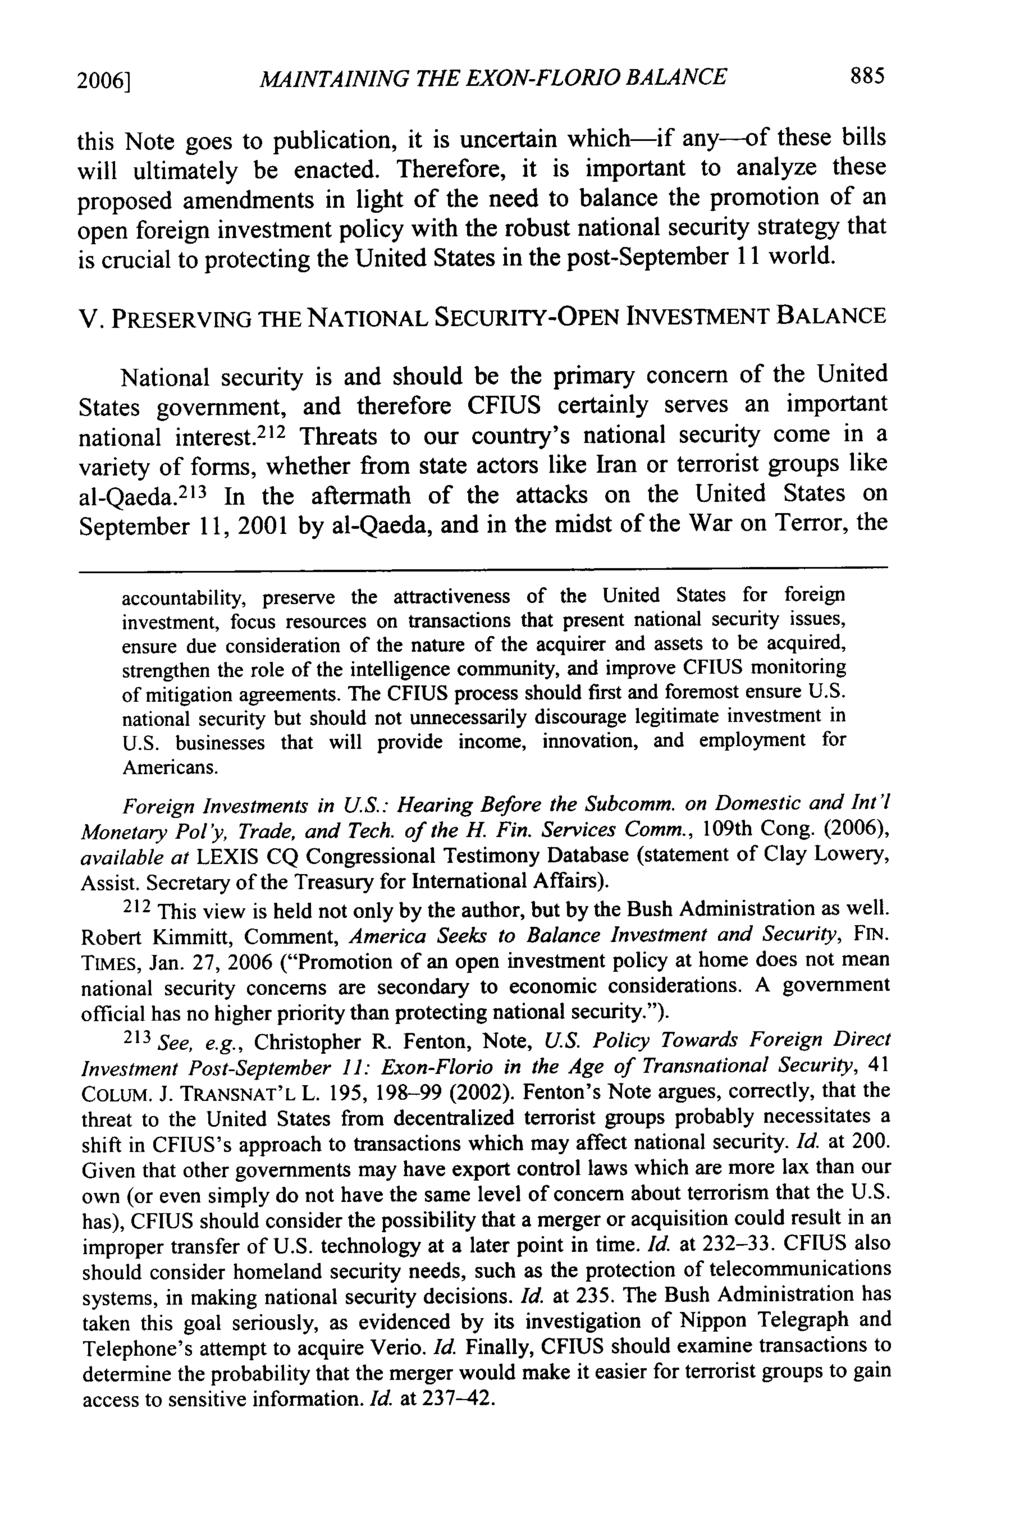 2006] MAINTAINING THE EXON-FLORIO BALANCE this Note goes to publication, it is uncertain which-if any-of these bills will ultimately be enacted.